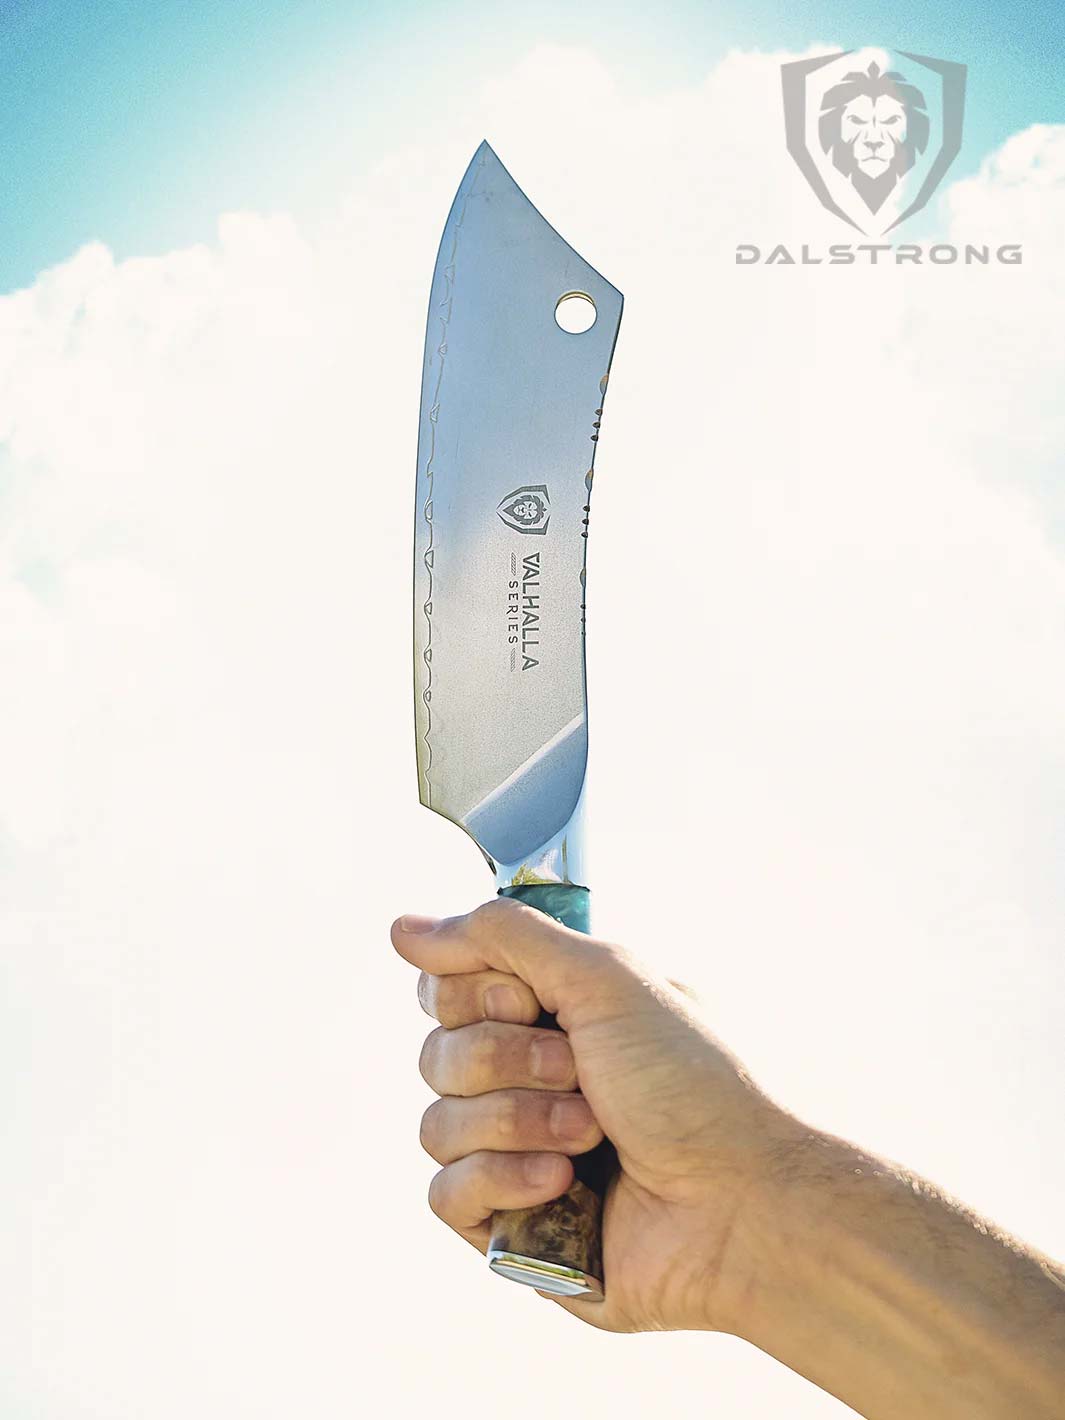 A hand holding the Dalstrong valhalla series 8 inch crixus knife with wooden handle.